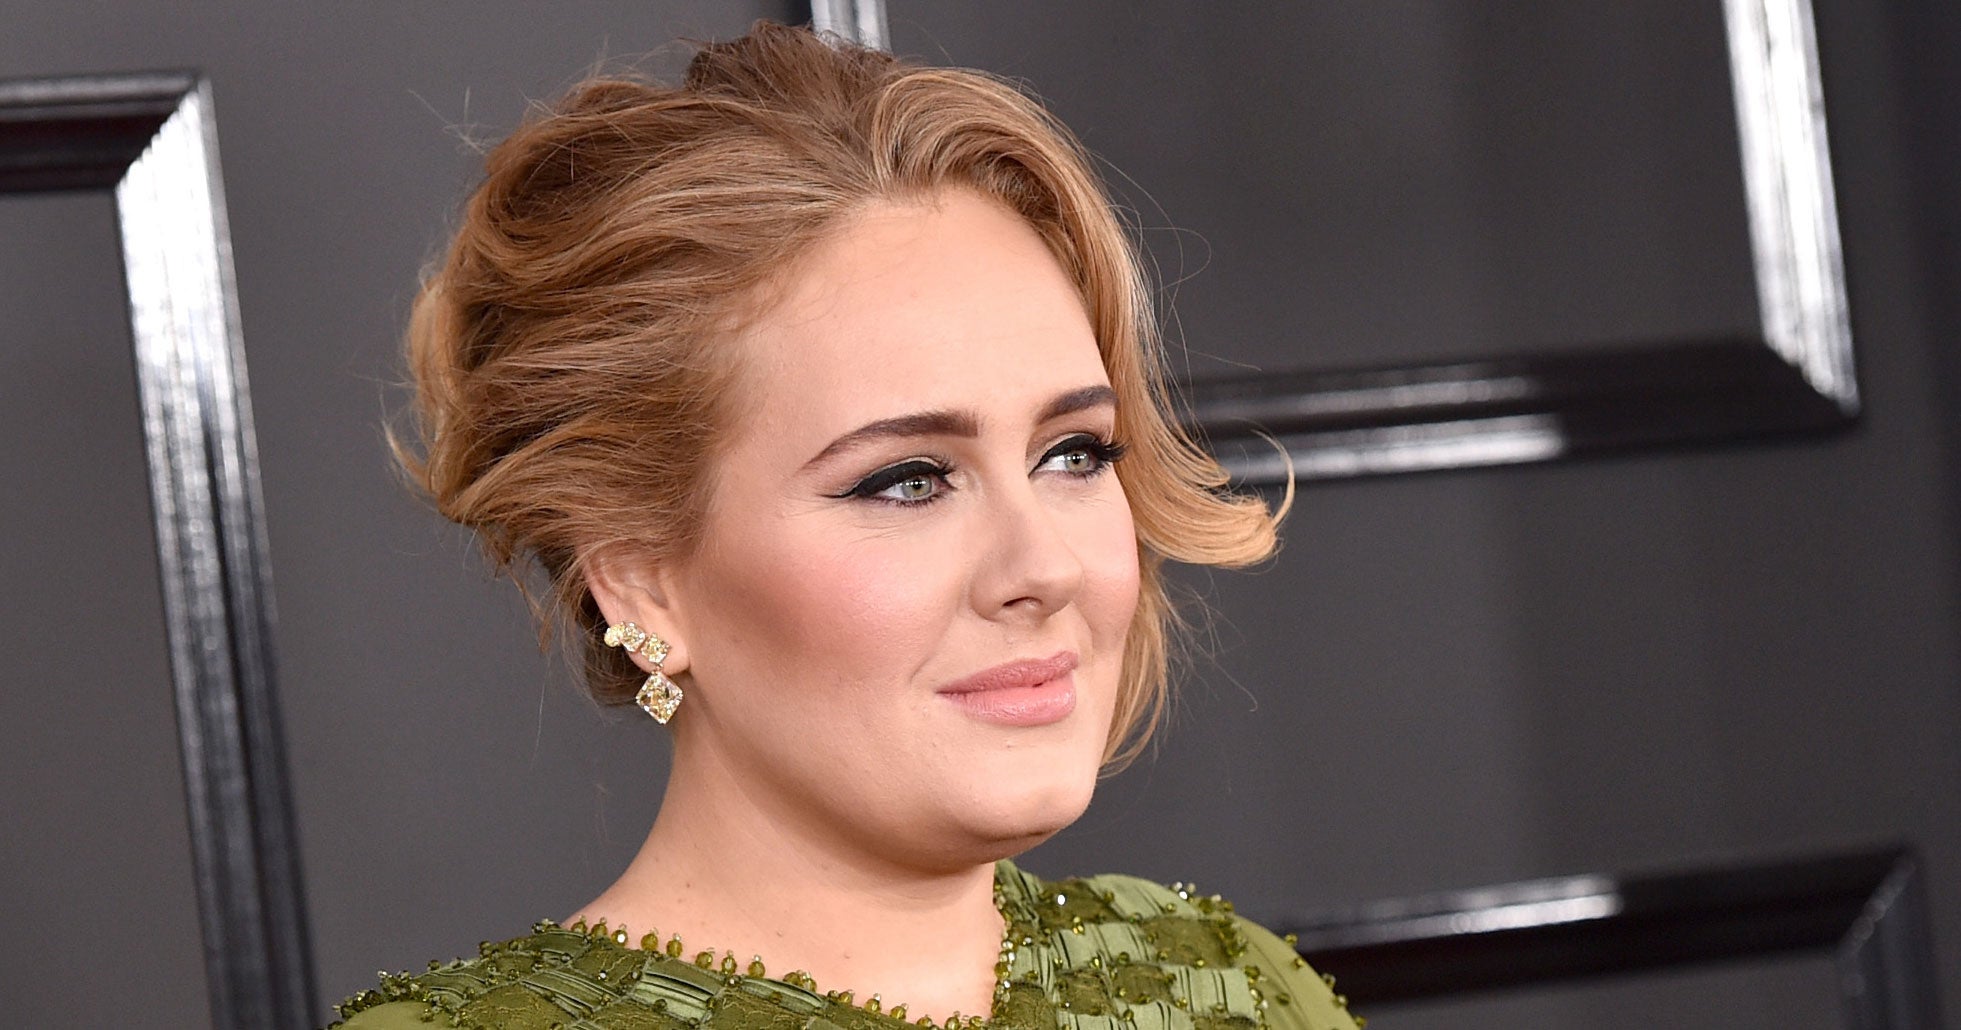 Adele Shows Off New Hair In First Instagram Photo 2020.